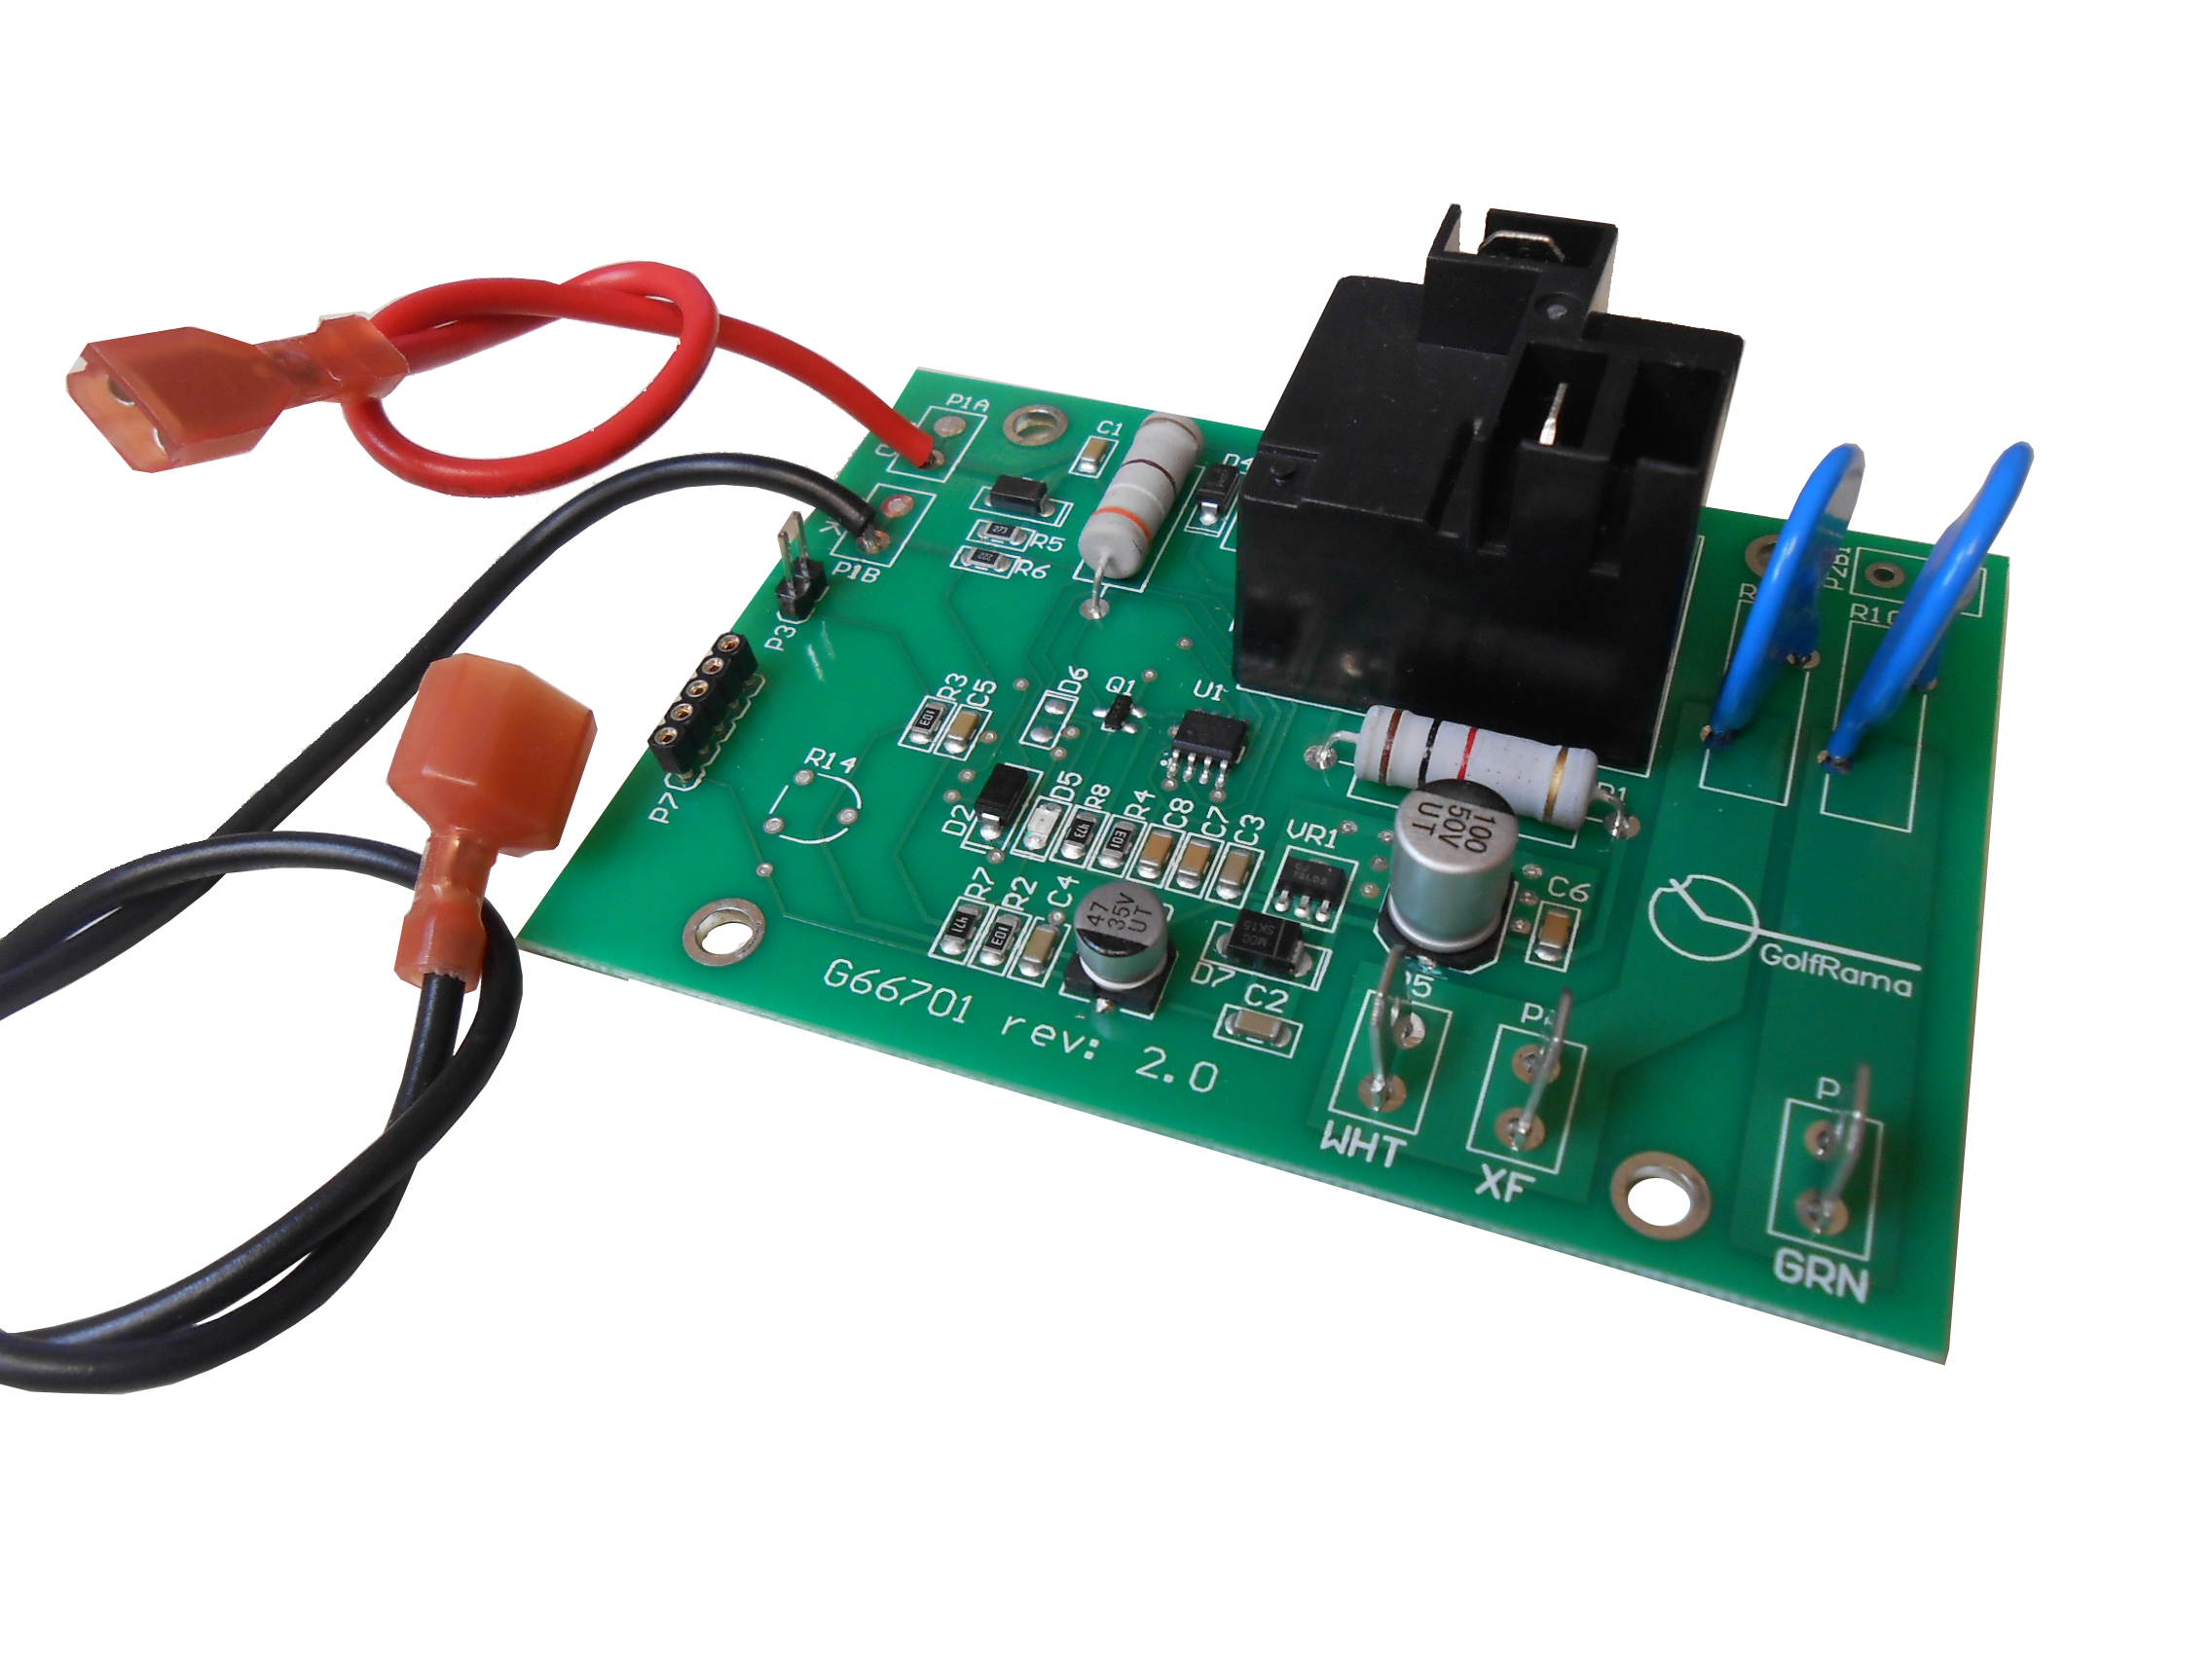 E-Z-GO Powerwise Charger Board 28667-G01